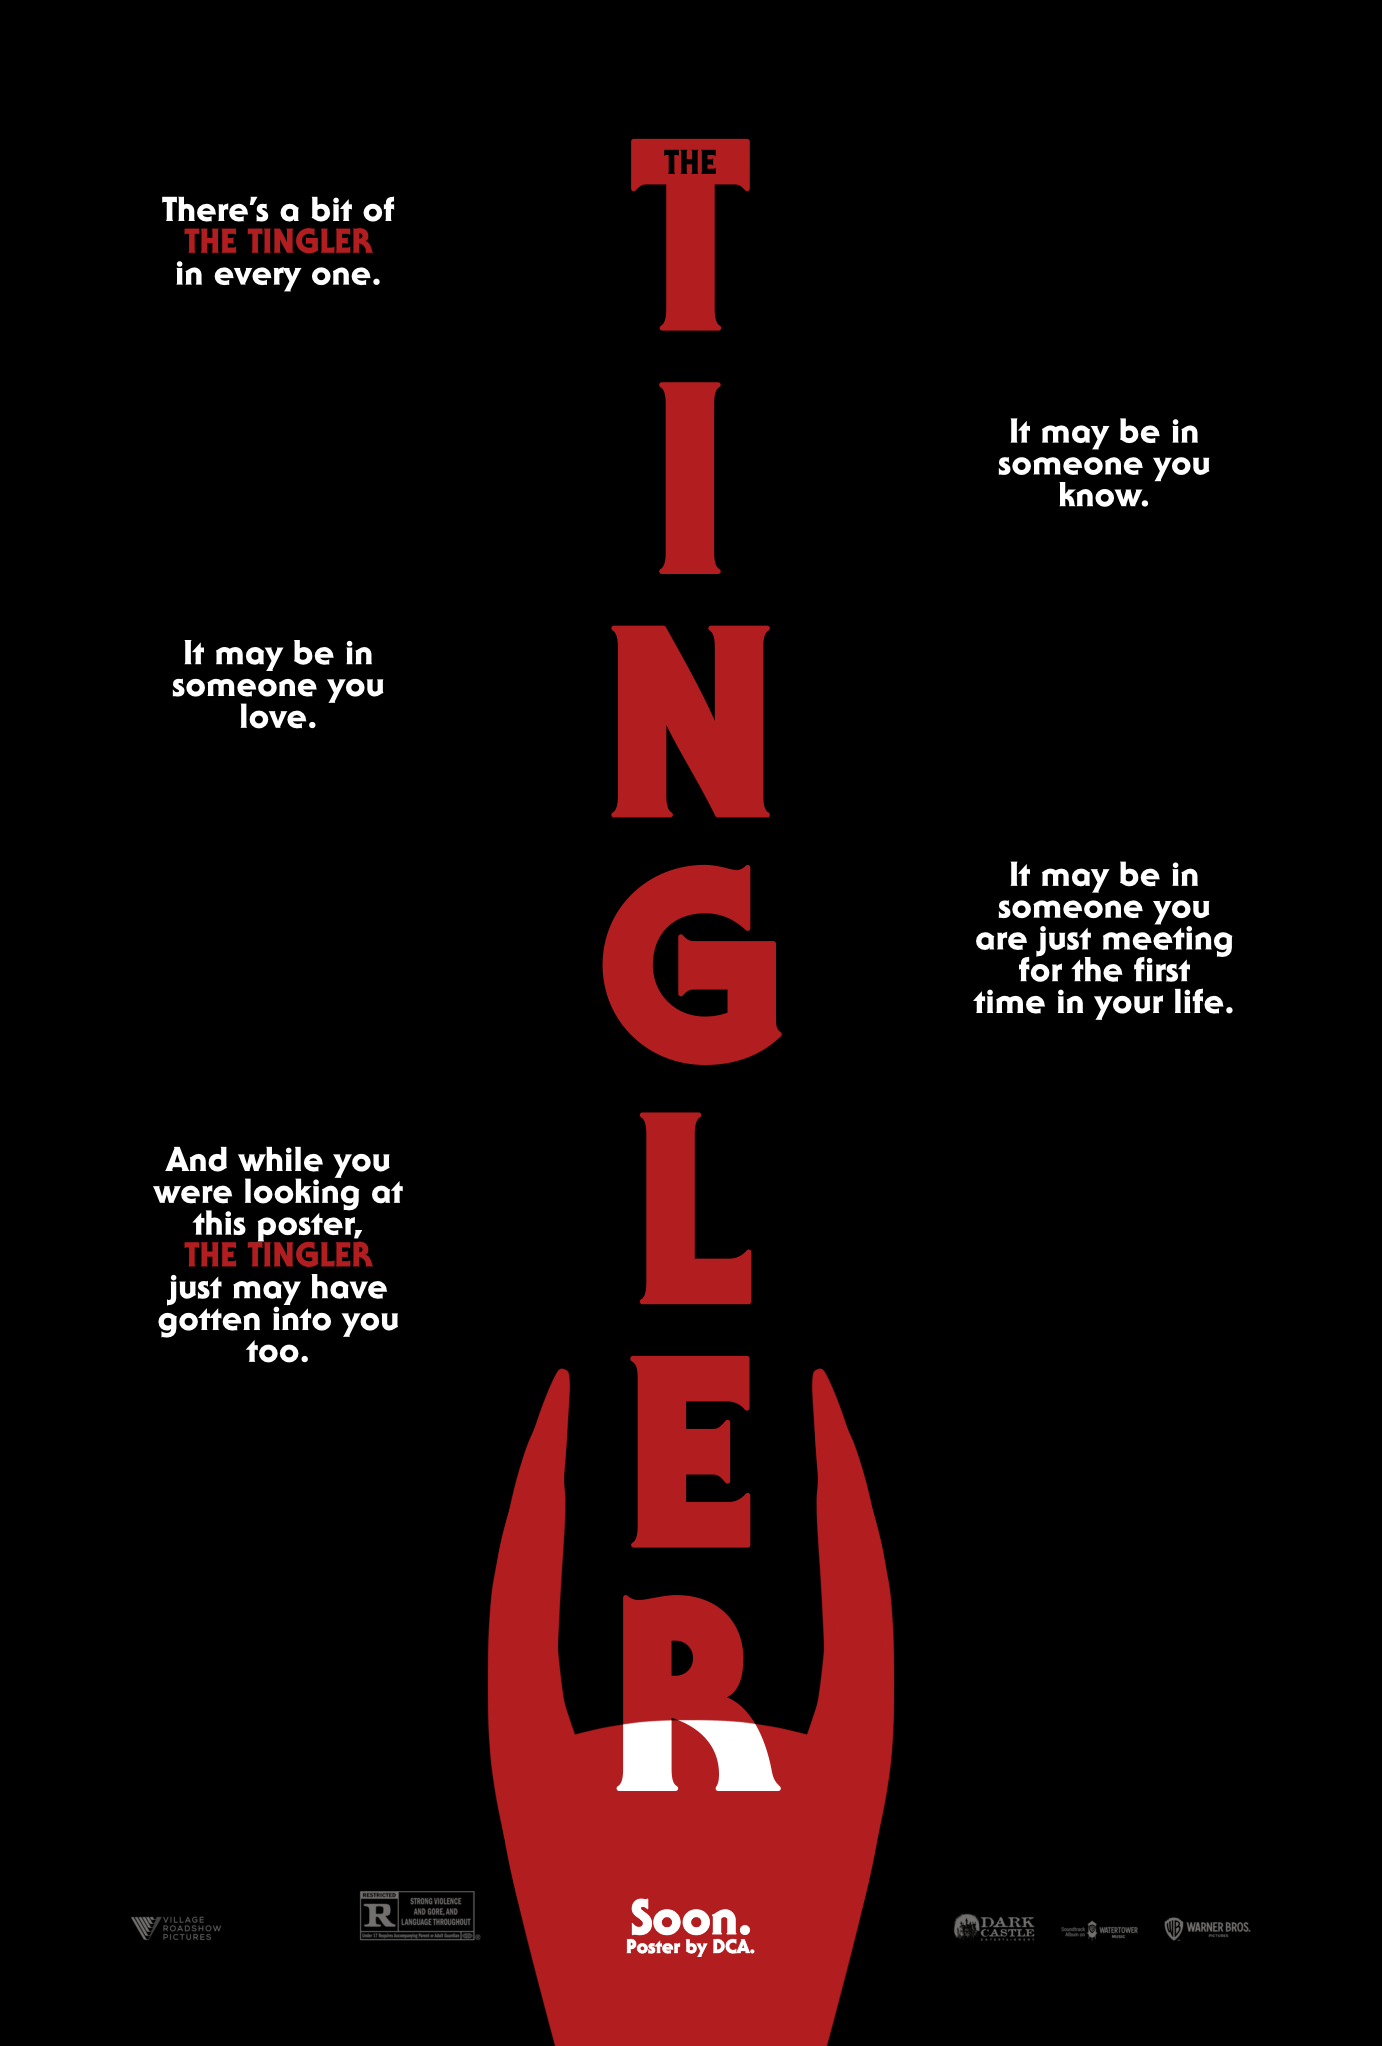 The Tingler – Concept Poster